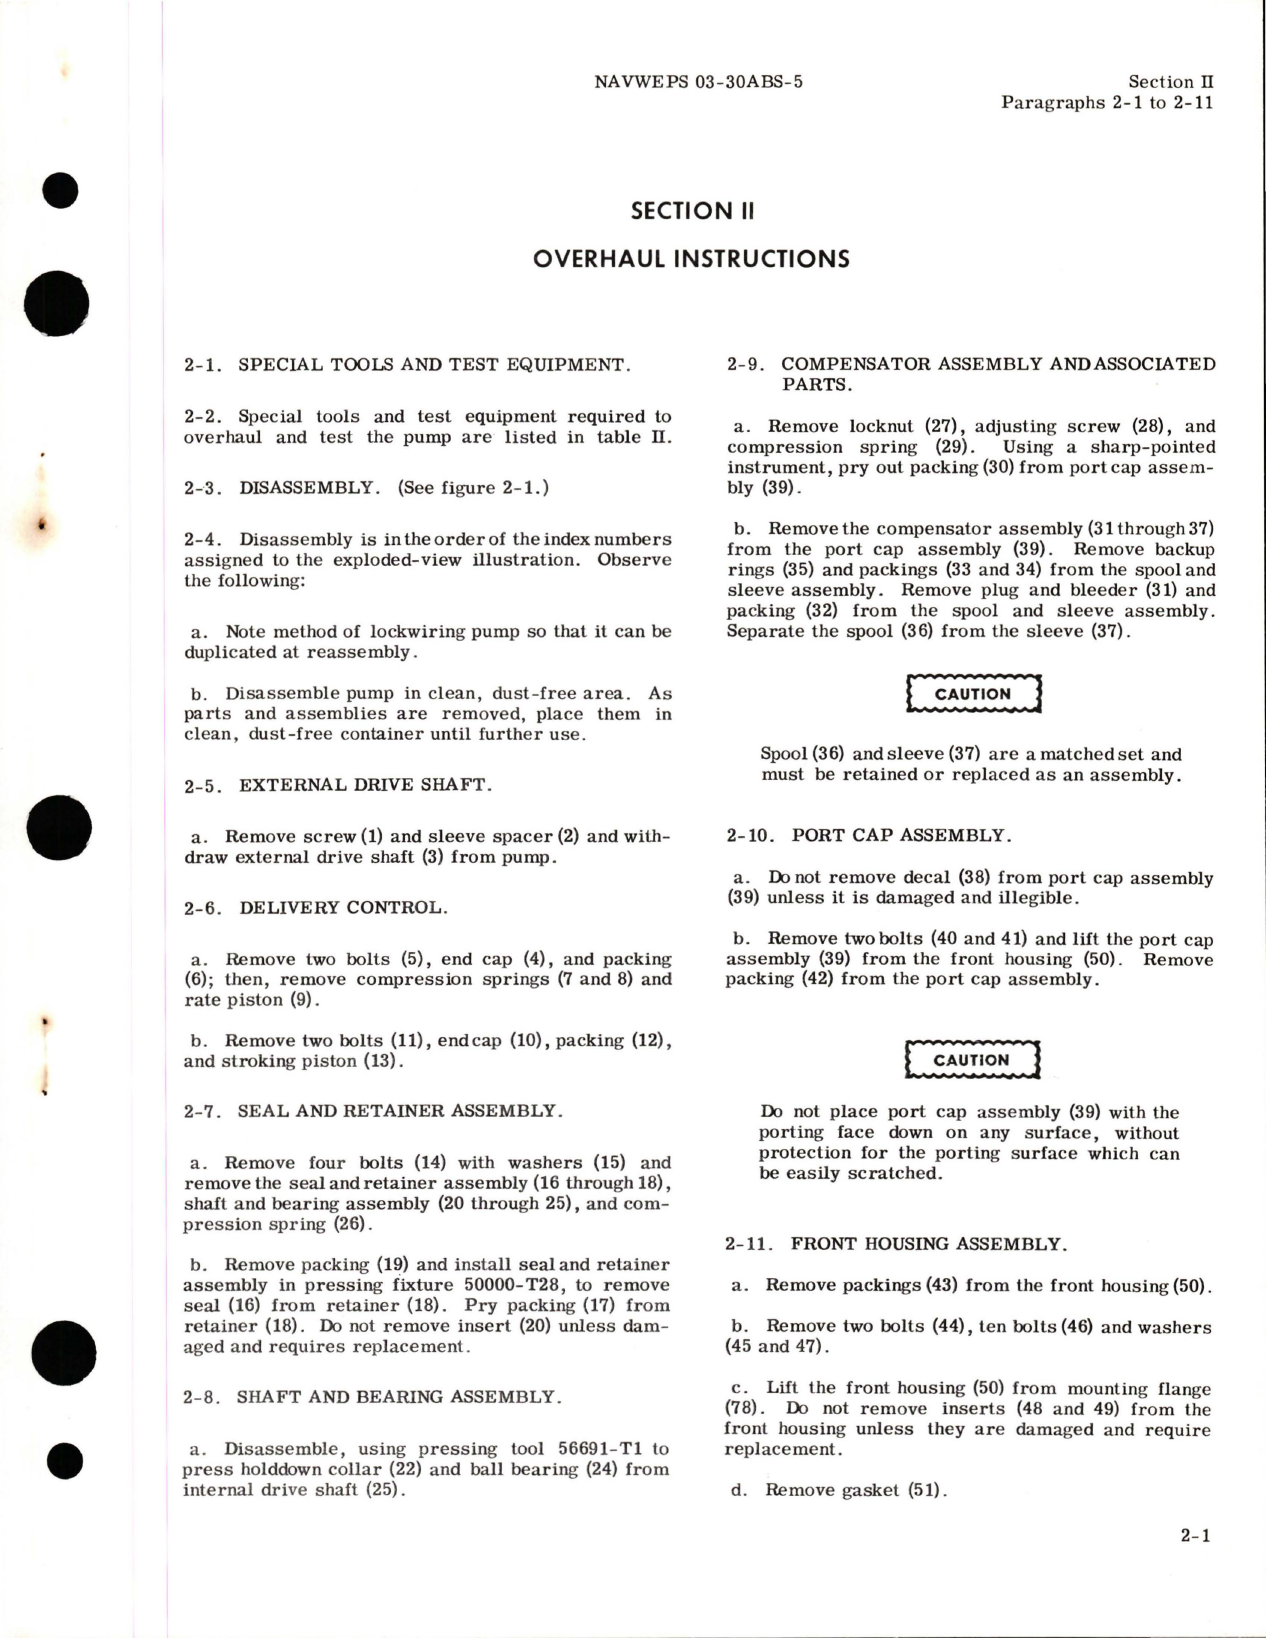 Sample page 7 from AirCorps Library document: Overhaul Instructions for Variable Displacement Hydraulic Pump - Part 51029 - Model AP6VSC-5